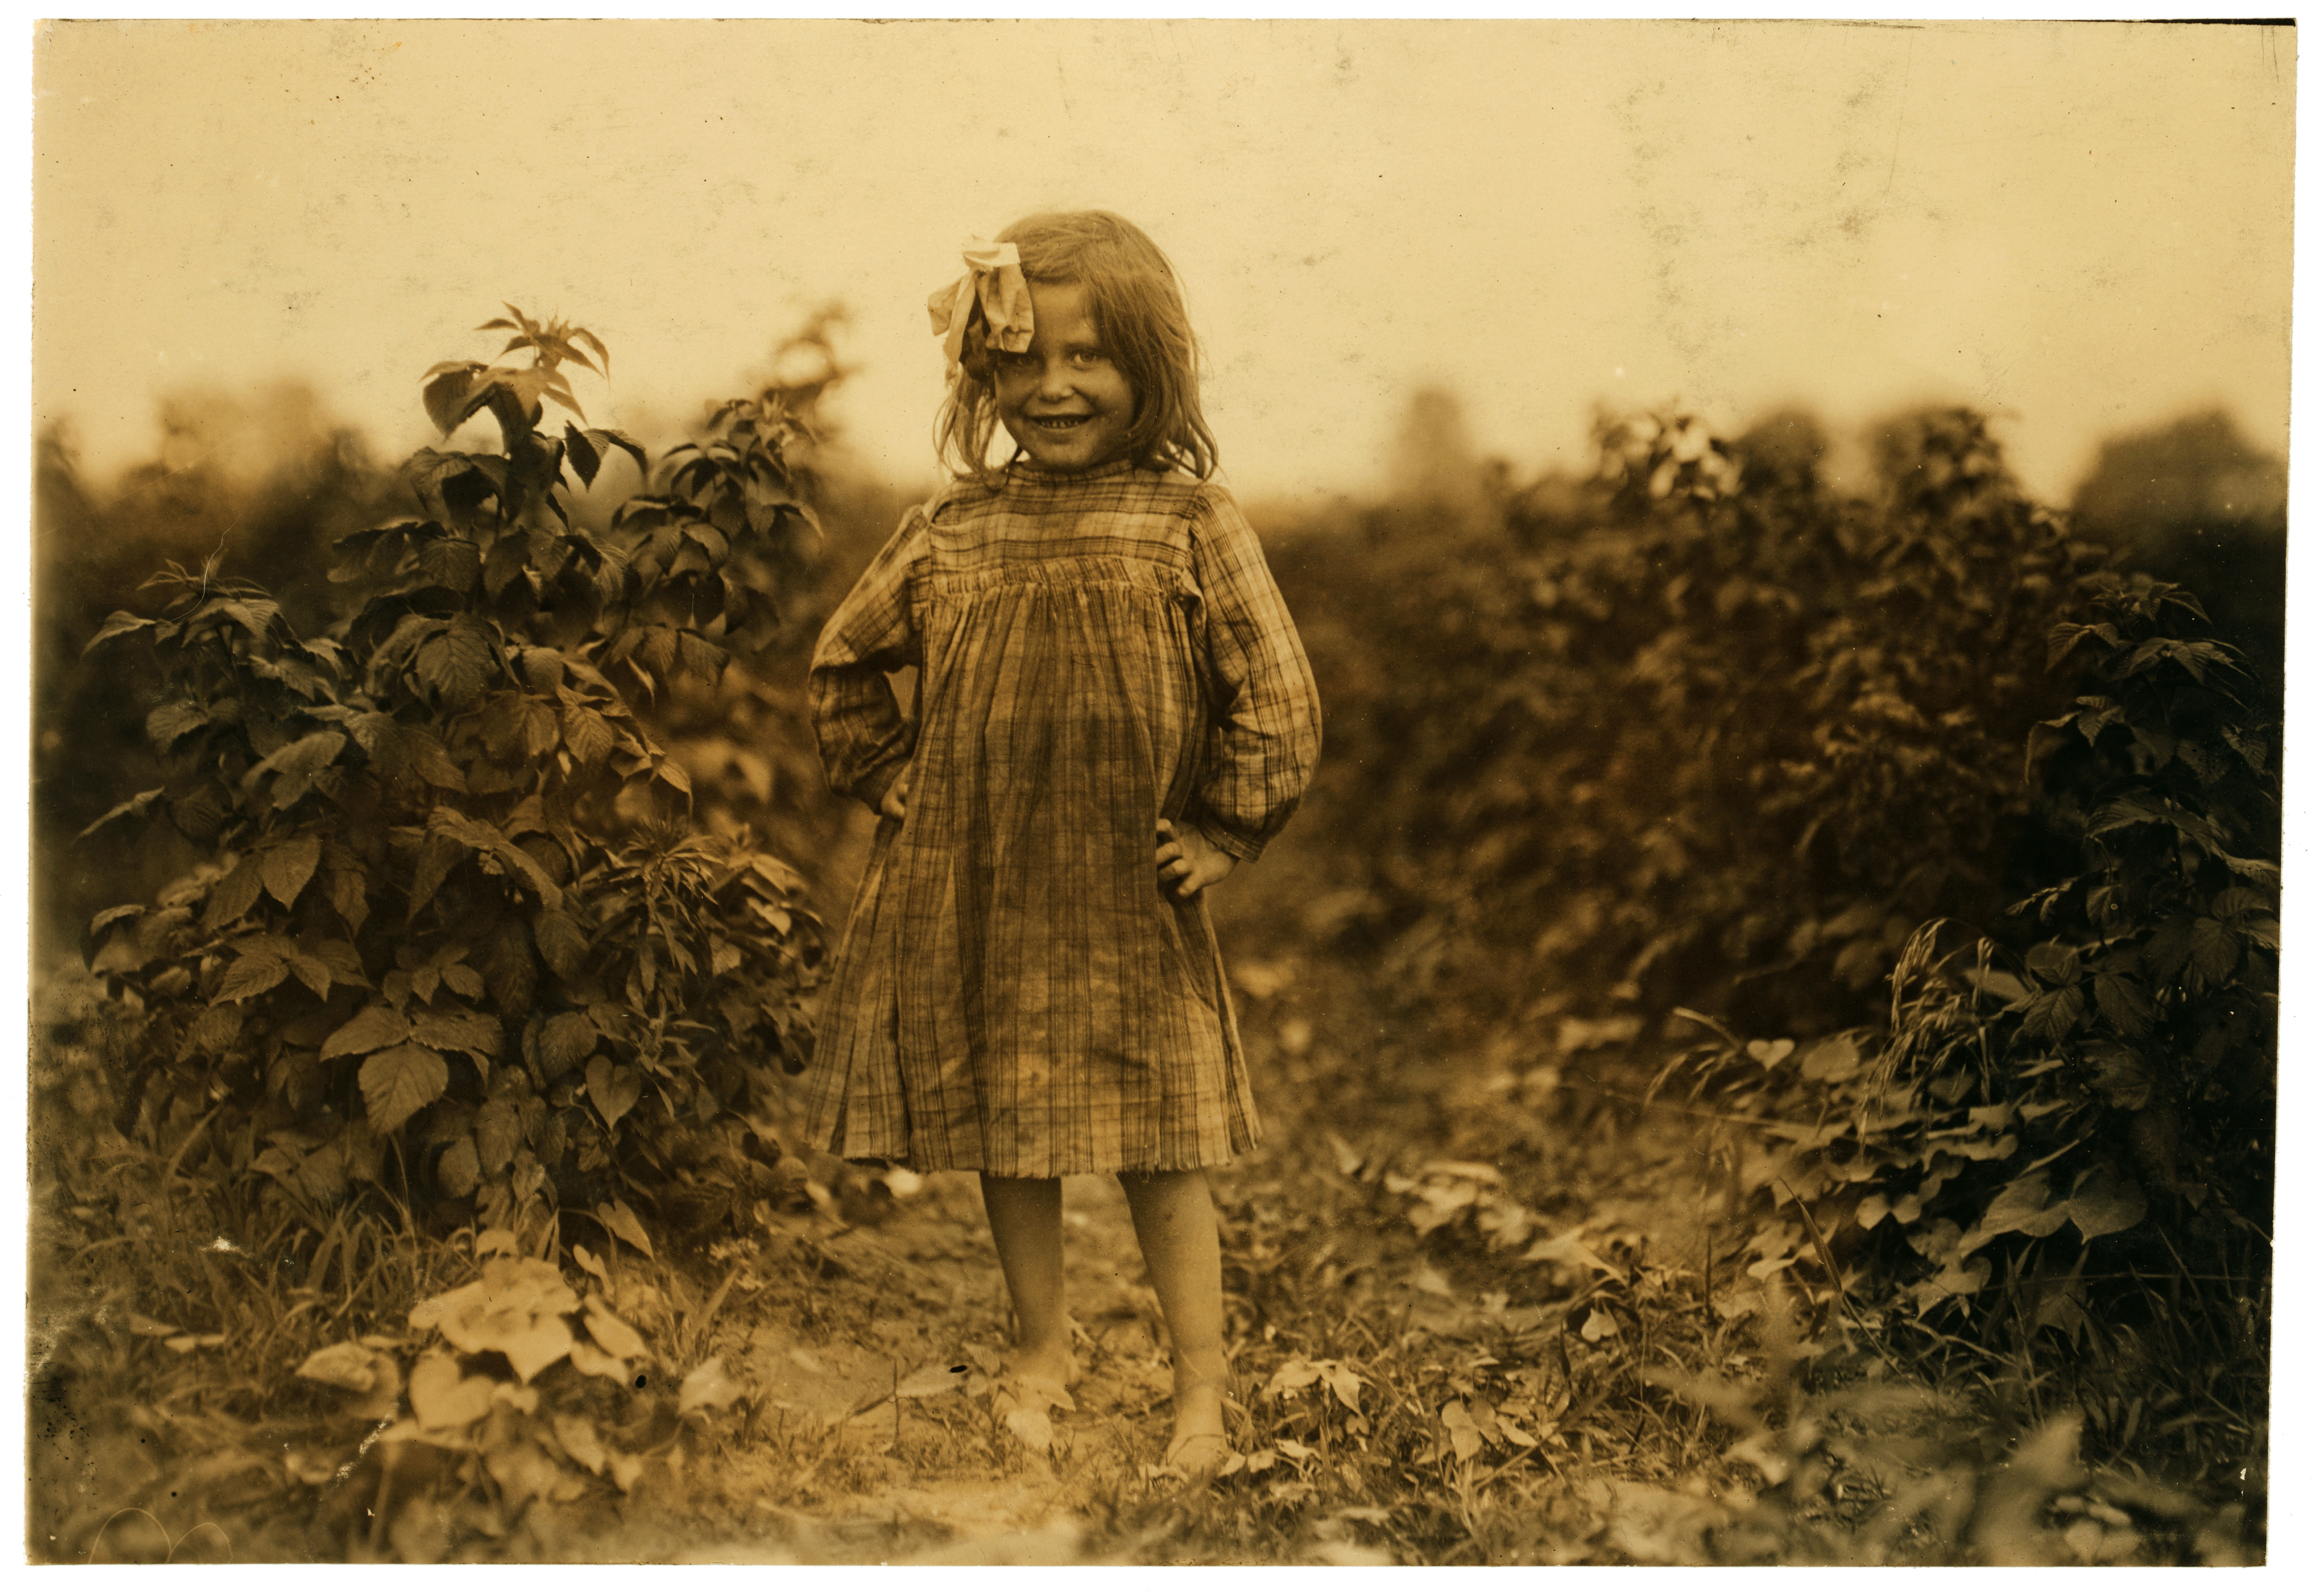 Lewis Hine, Laura Petty, a 6 year old berry picker on Jenkins farm, Rock Creek, Maryland, 1909